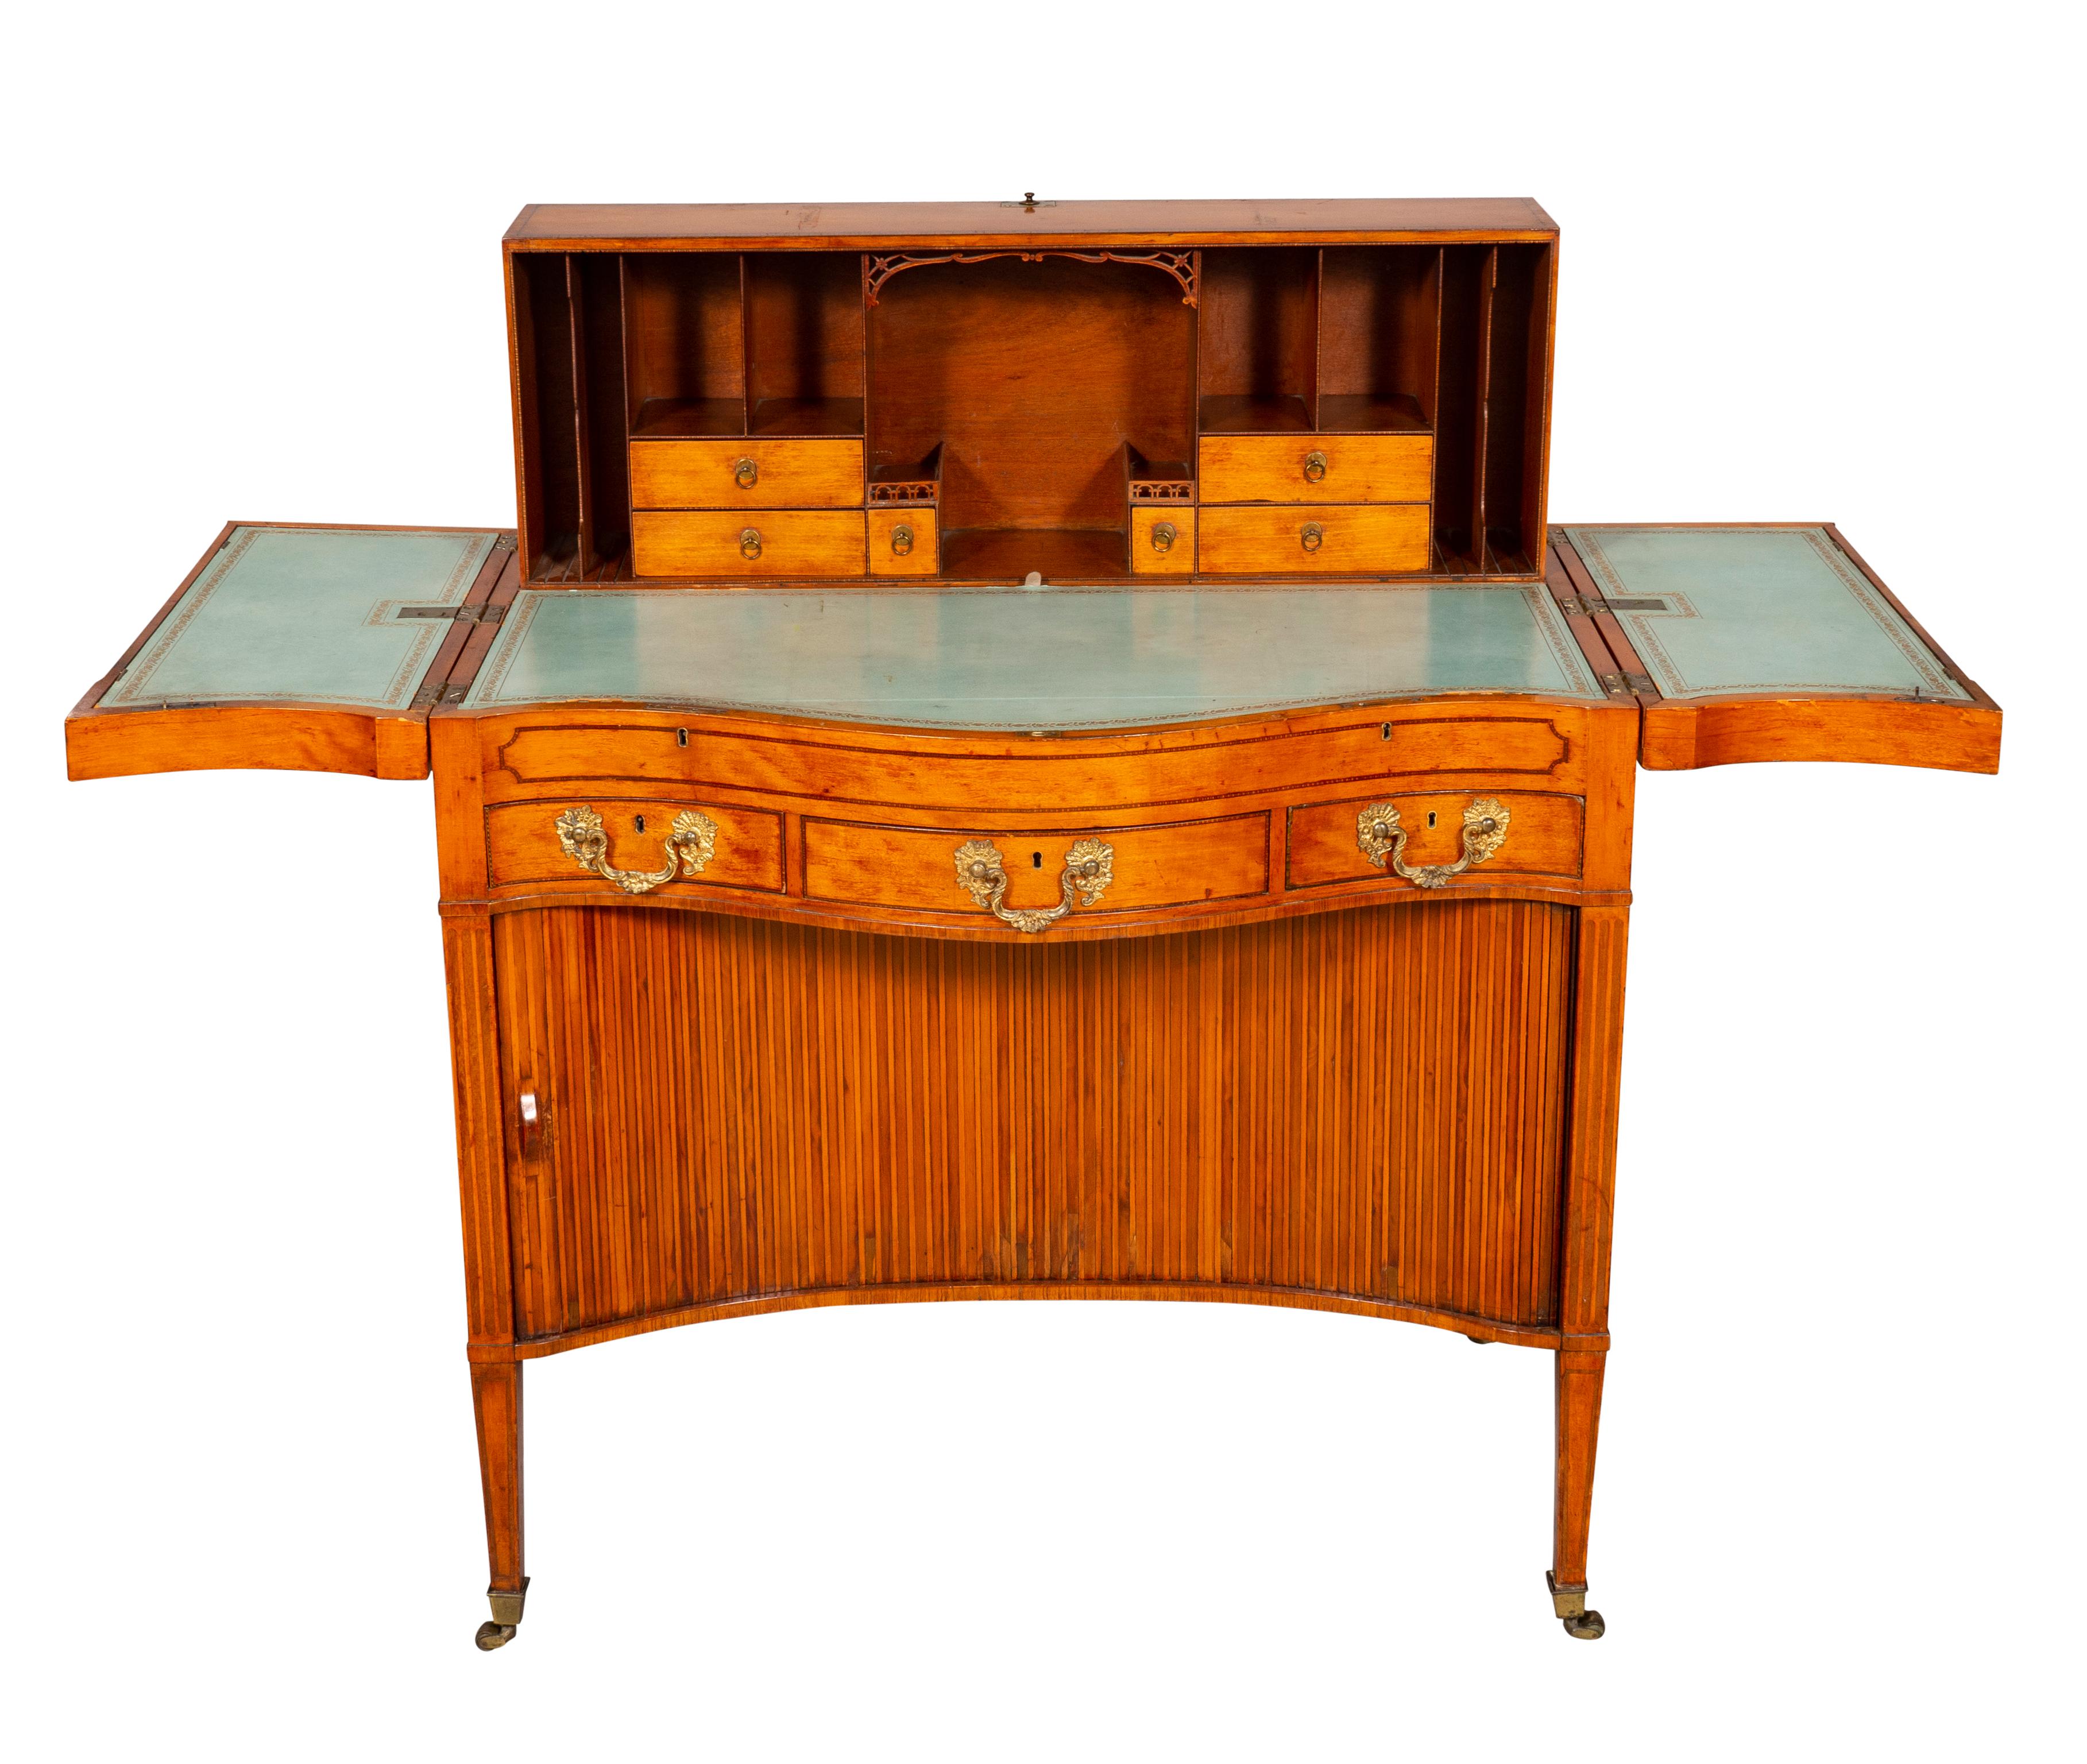 With a serpentine divided top with oval inlaid panel with hunting scene with hounds and hares with floral medallions at the corners , hinged outer sections fitted with a well and central section lifting and fitting into a recess , leather top of